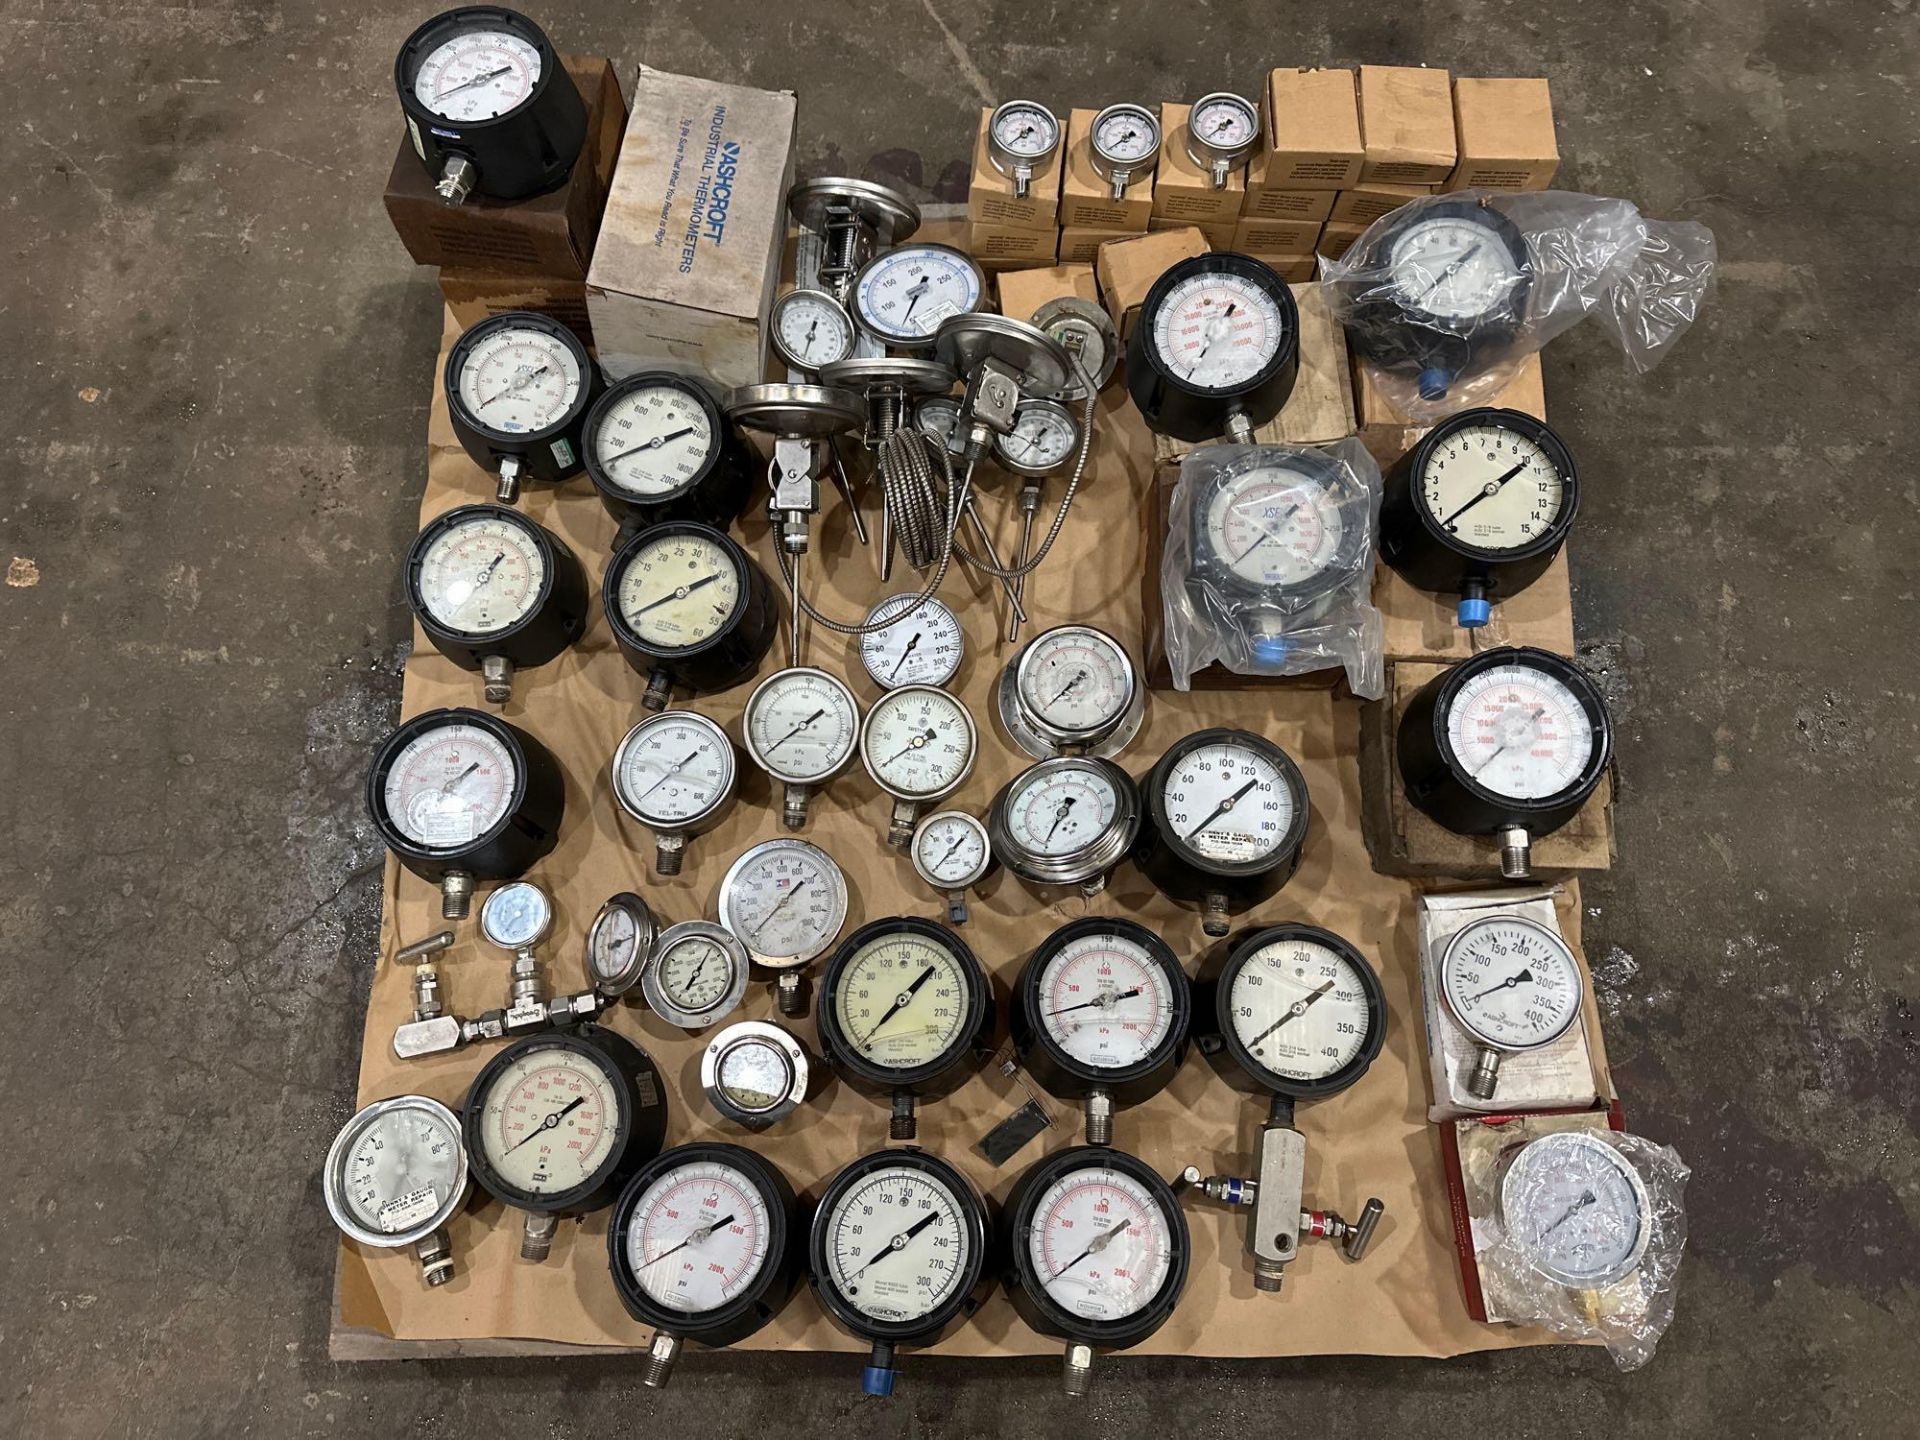 Pallet of Gauges Assorted Sizes and Brands: Ashcroft, Wika, Noshok, Winters. See photo.